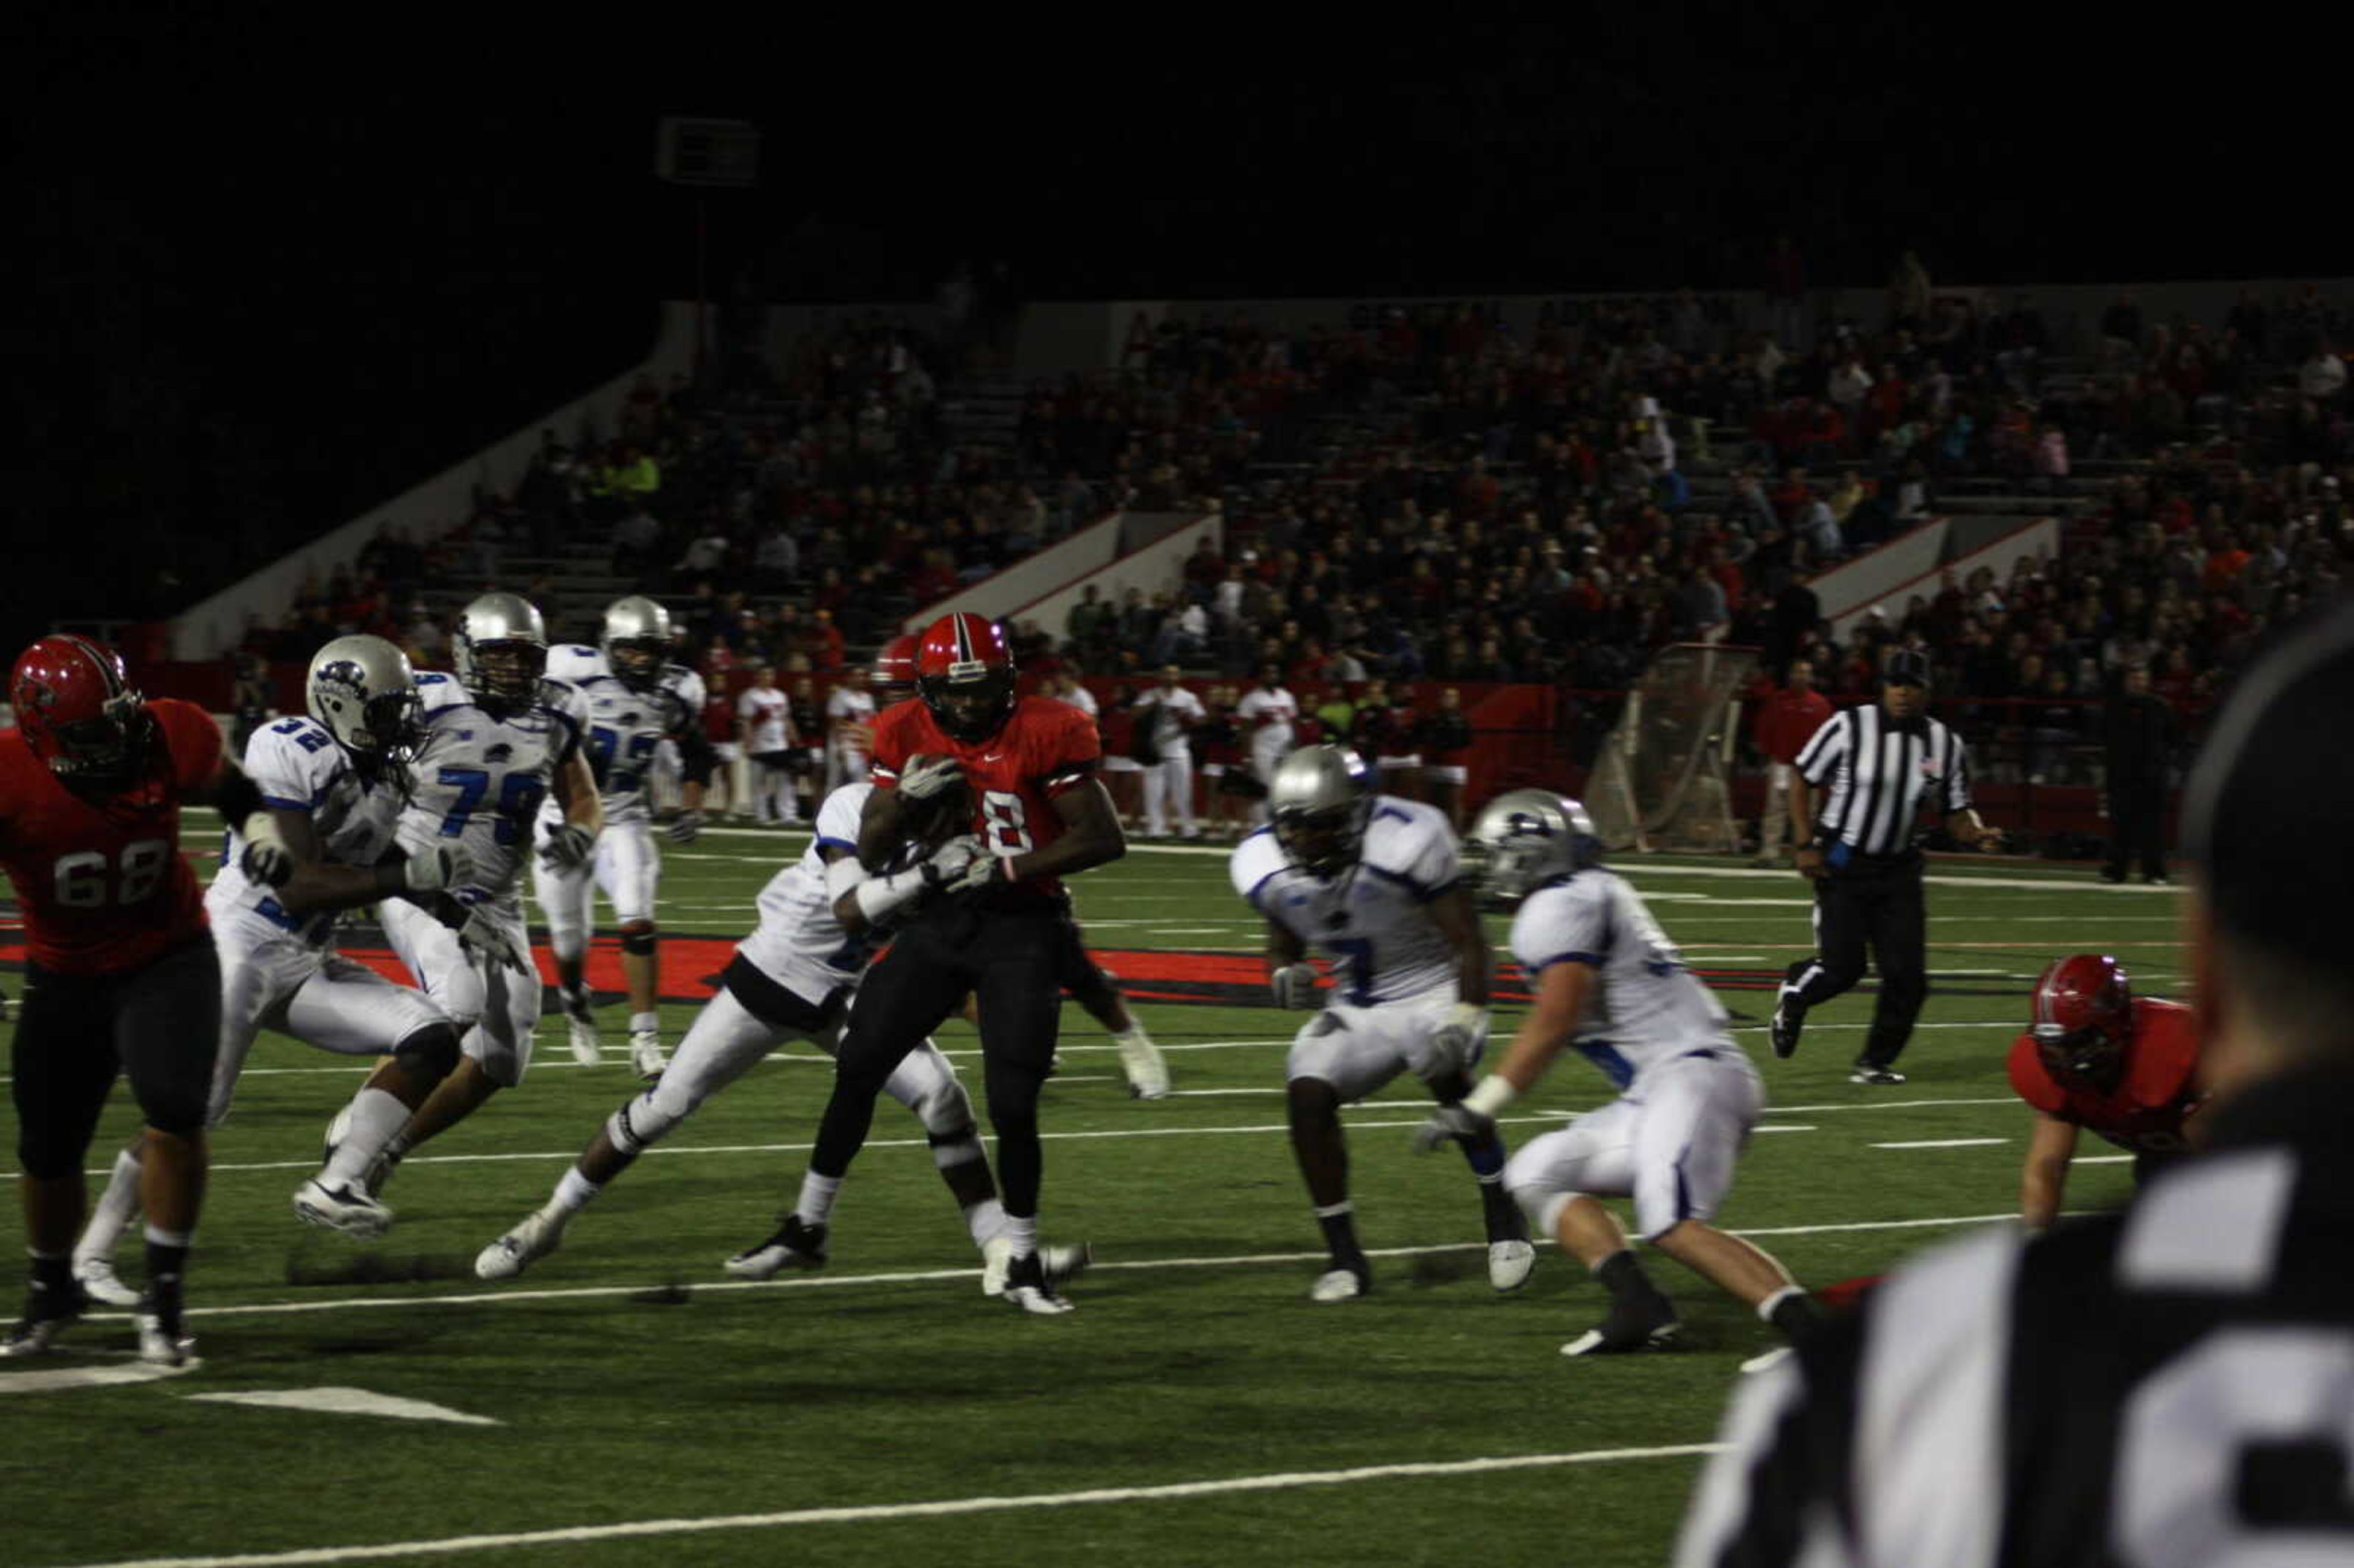 The Southeast football team will play its 21st homecoming game at the FCS level at 1 p.m. this Saturday at Houck Stadium. The Redhawks will face the Austin Peay Governors in their fifth Ohio Valley Conference game of the season. Running back Renard Celestin (above) is projected to start.   - Photo by Kelso Hope